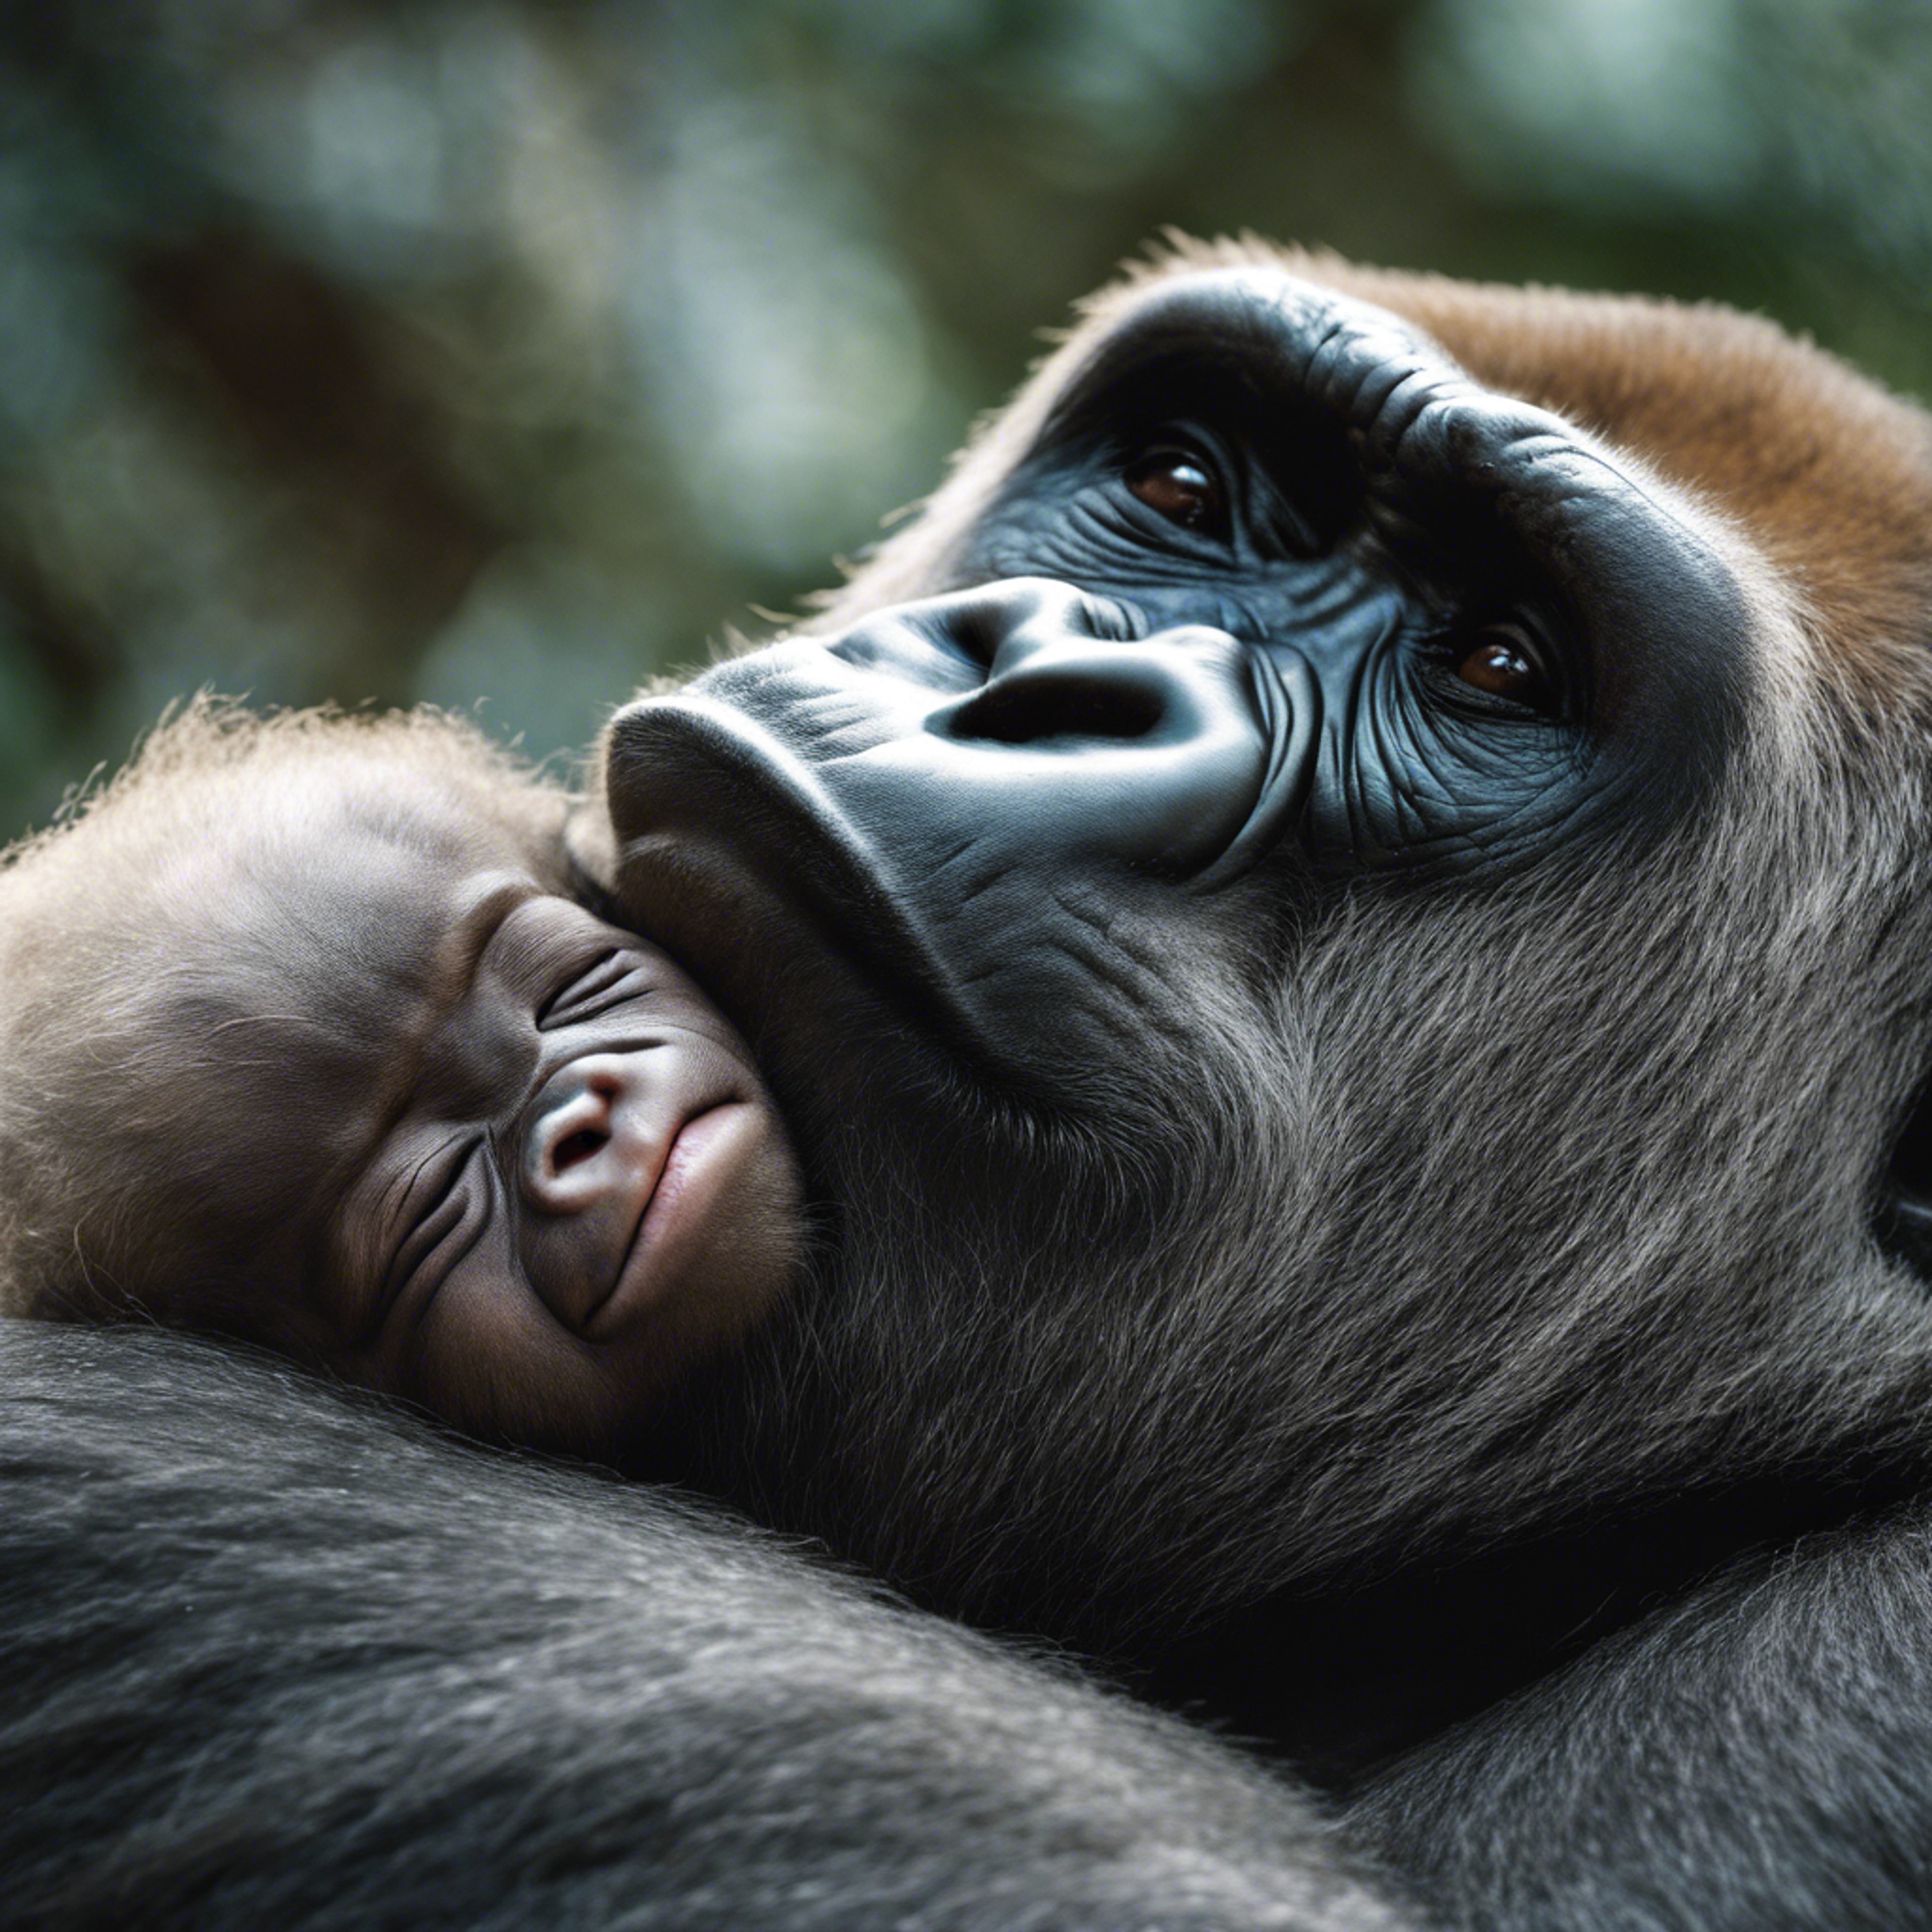 A close-up, emotional study of a gorilla mother's face as she cradles her sleeping newborn. Kertas dinding[516e0f2ed6254482ad03]